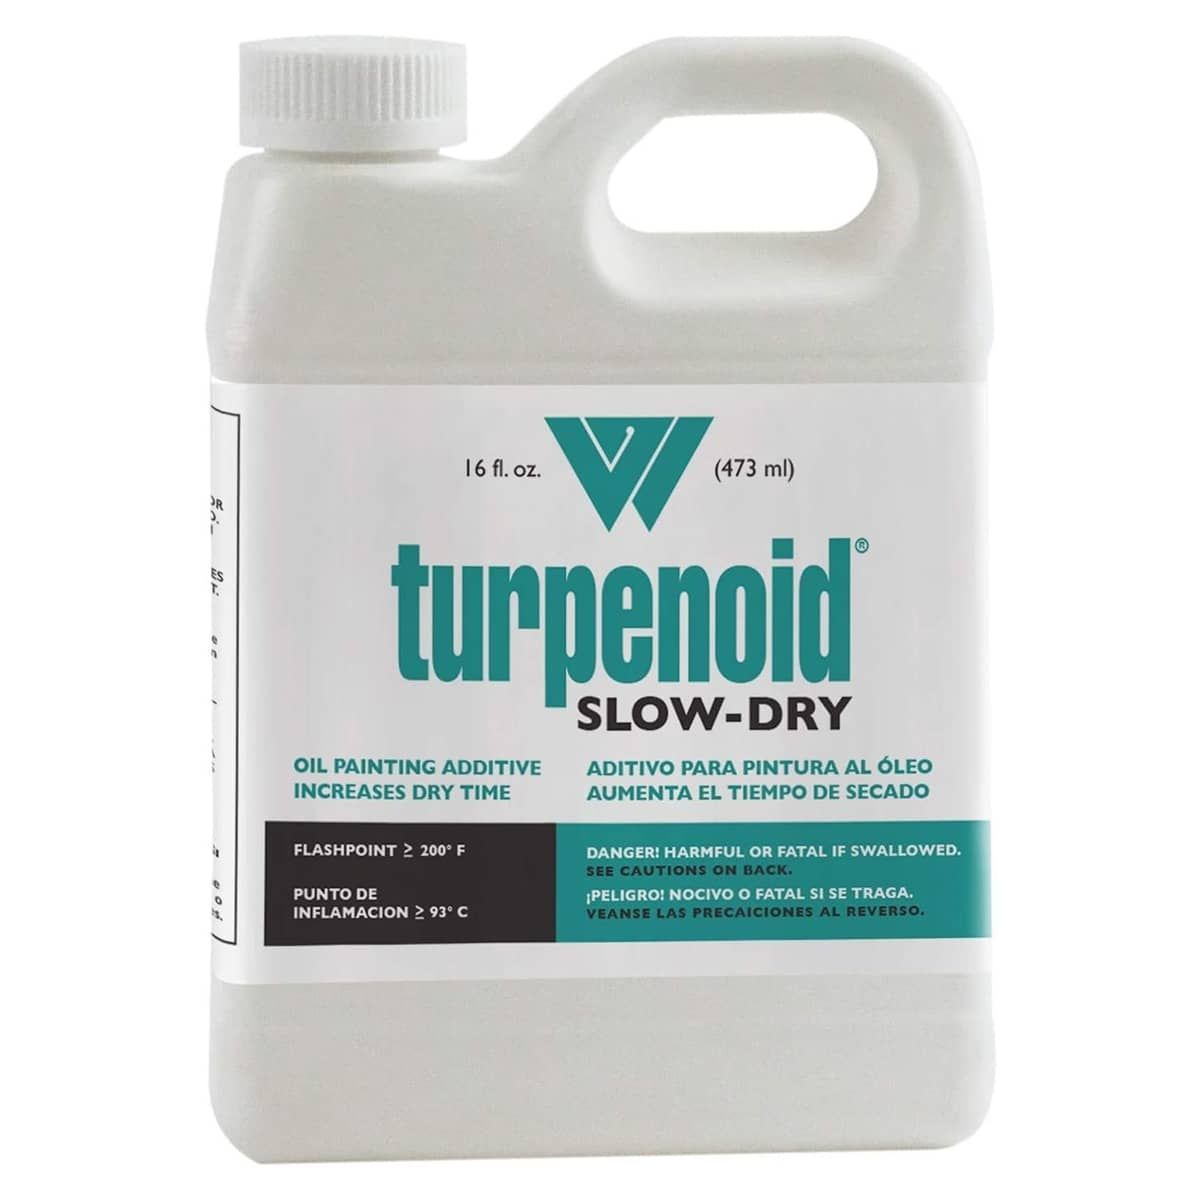 Weber Odorless Turpenoids, Natural & Slow-Dry